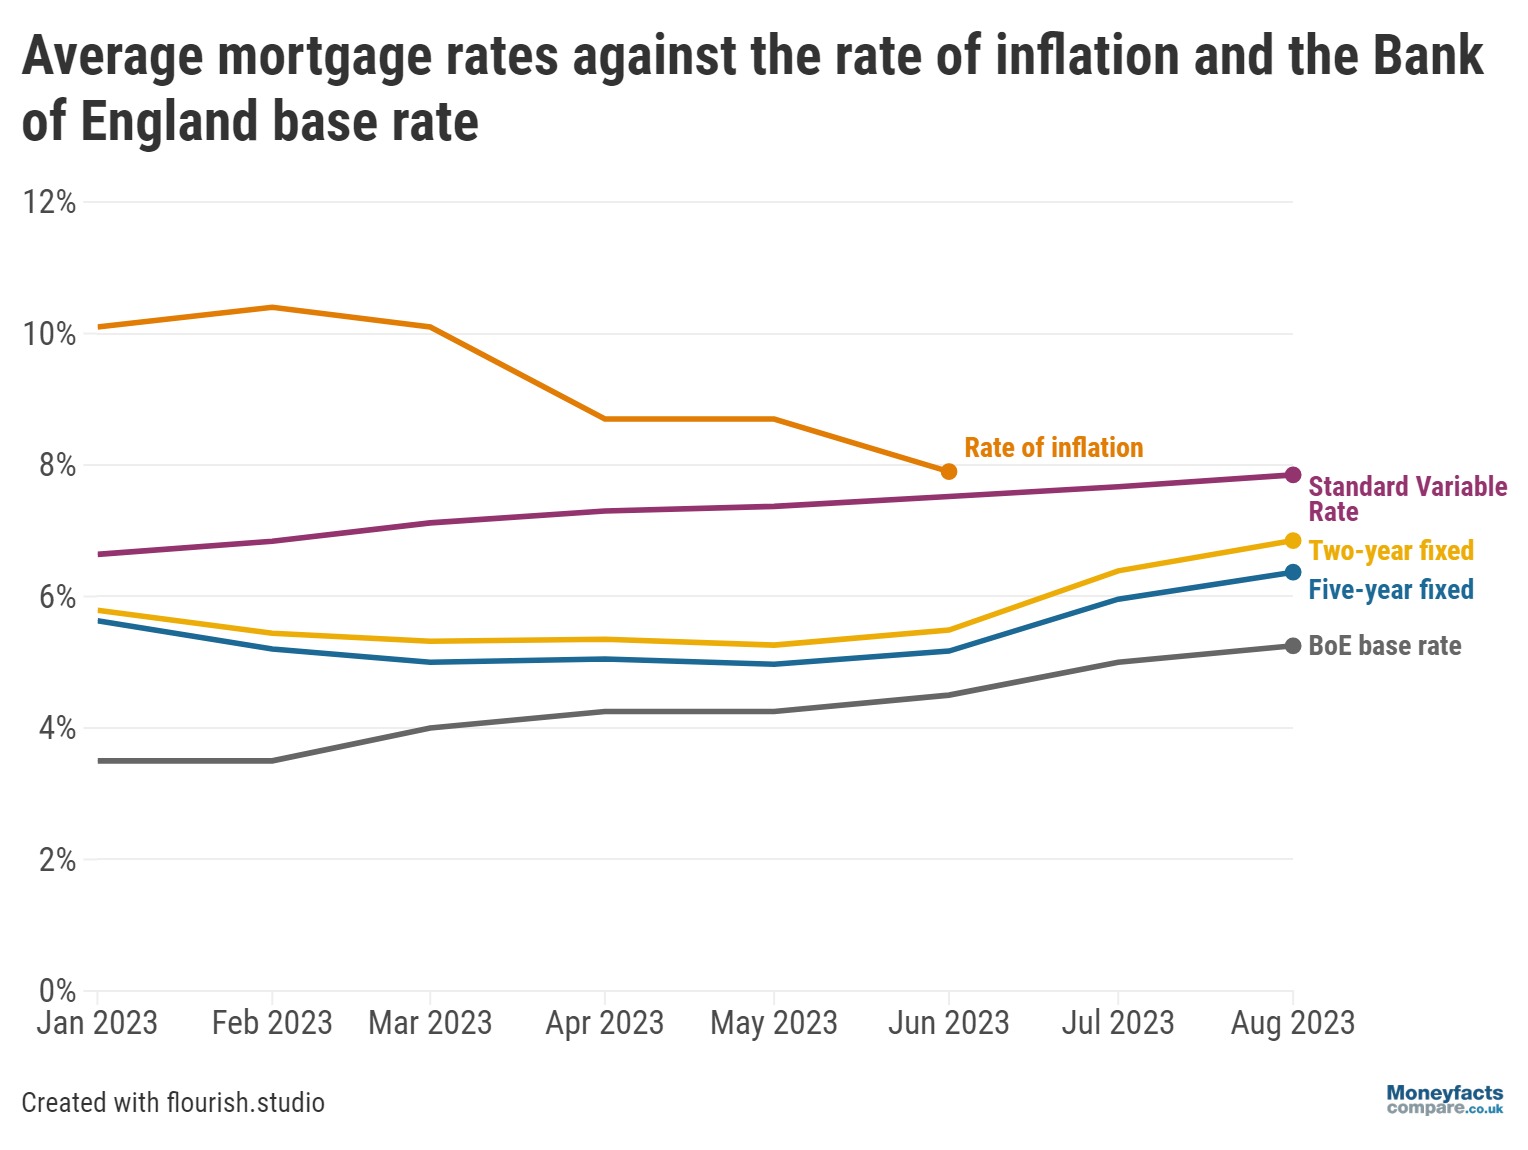 Mortgage rates in 2023